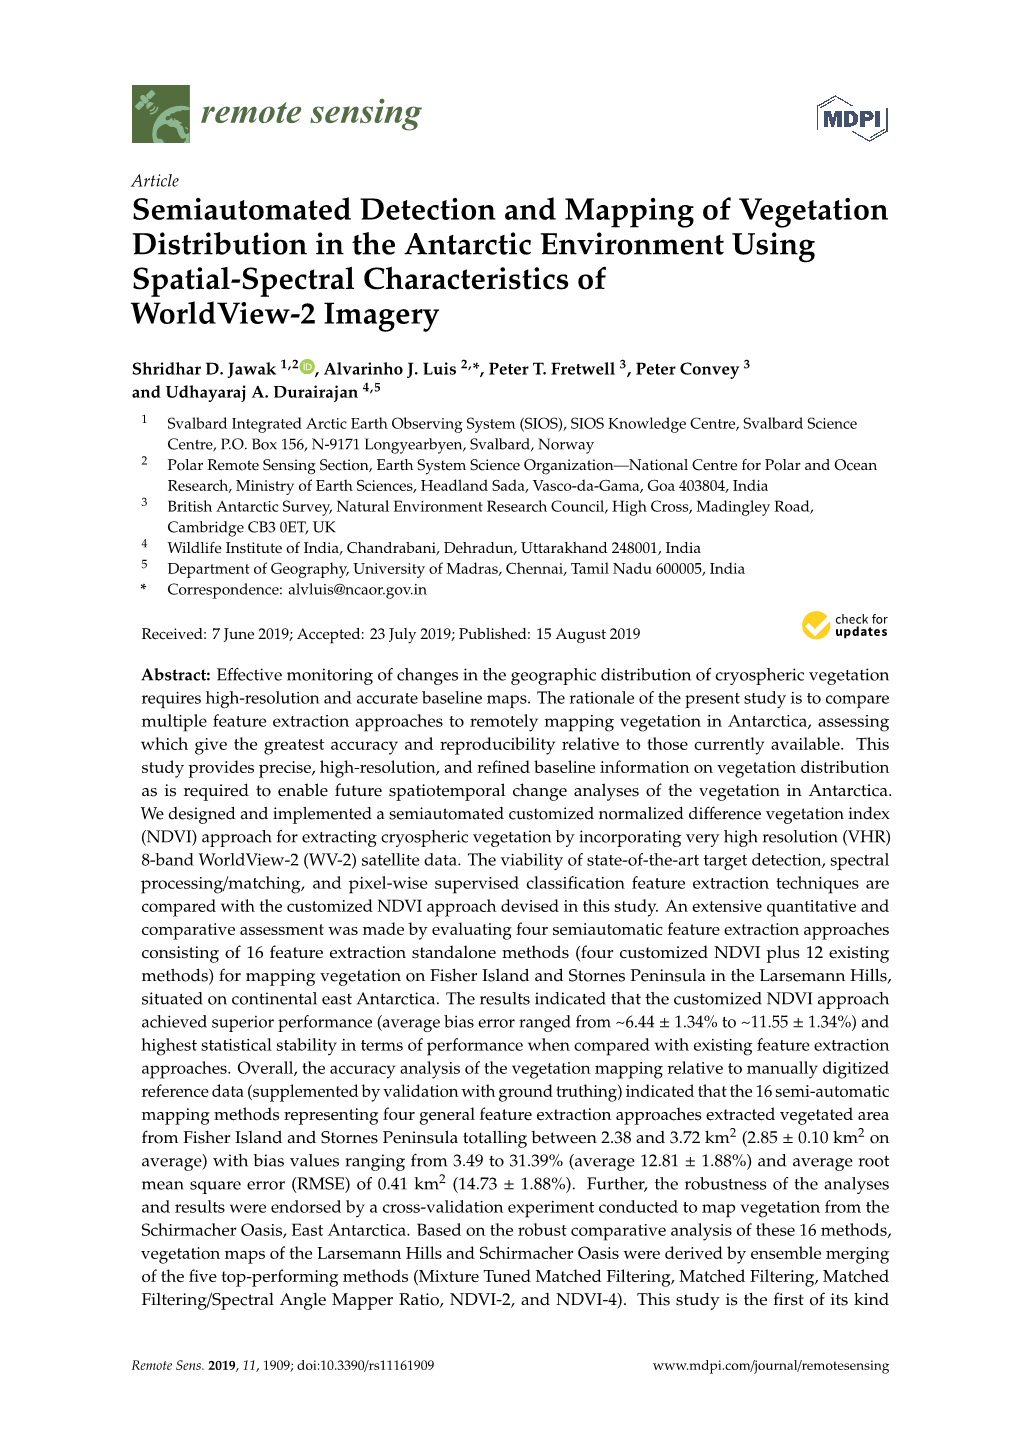 Semiautomated Detection and Mapping of Vegetation Distribution in the Antarctic Environment Using Spatial-Spectral Characteristics of Worldview-2 Imagery